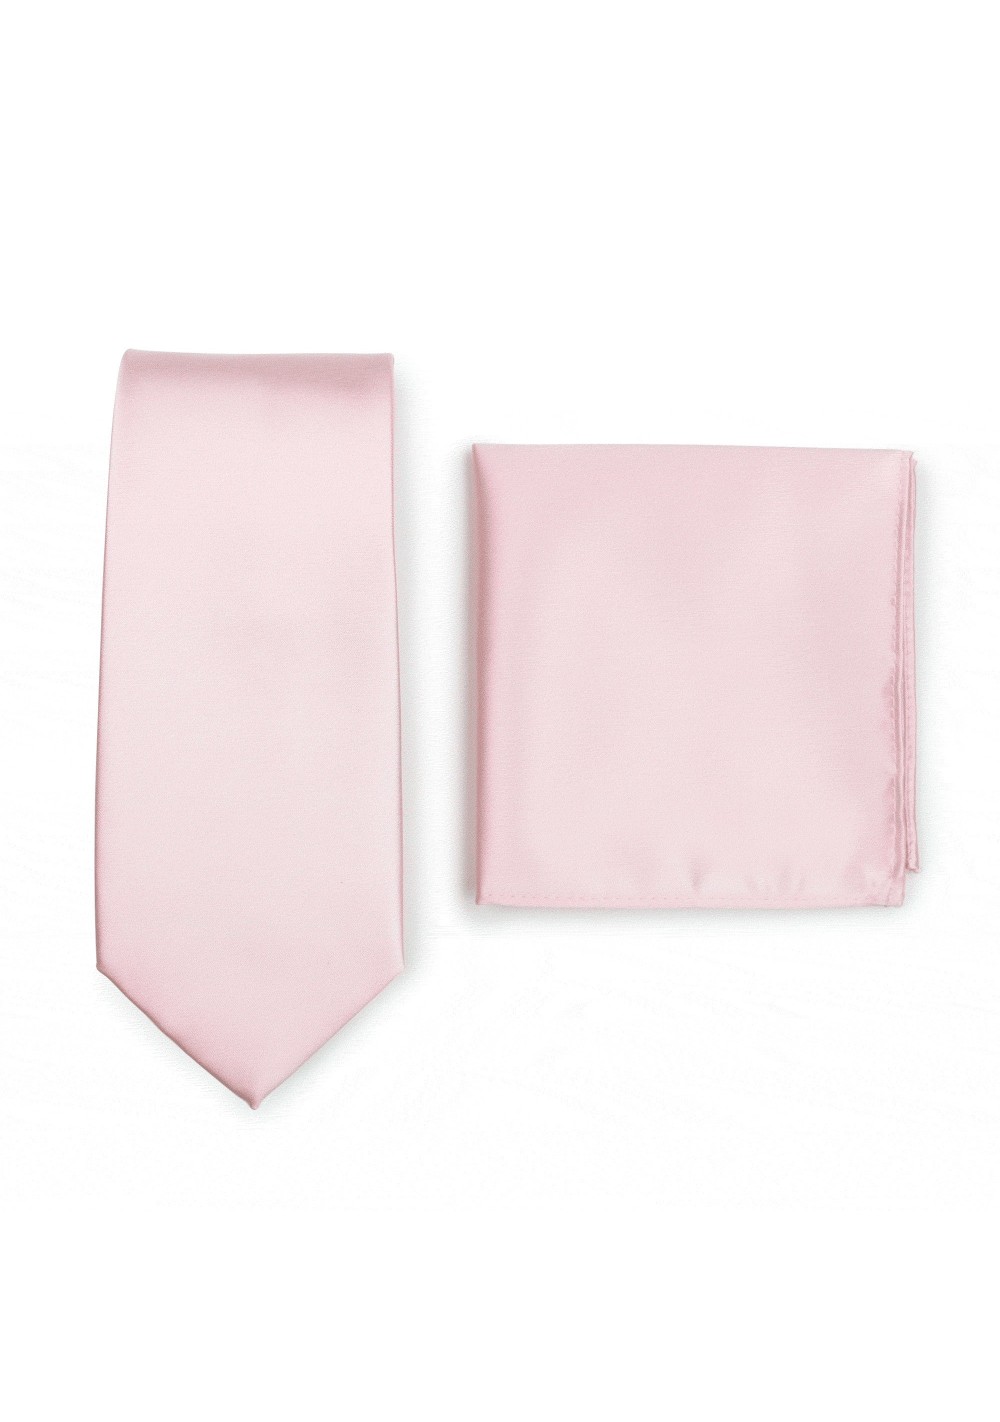 Solid Satin Necktie and Hanky Set in Blush Pink